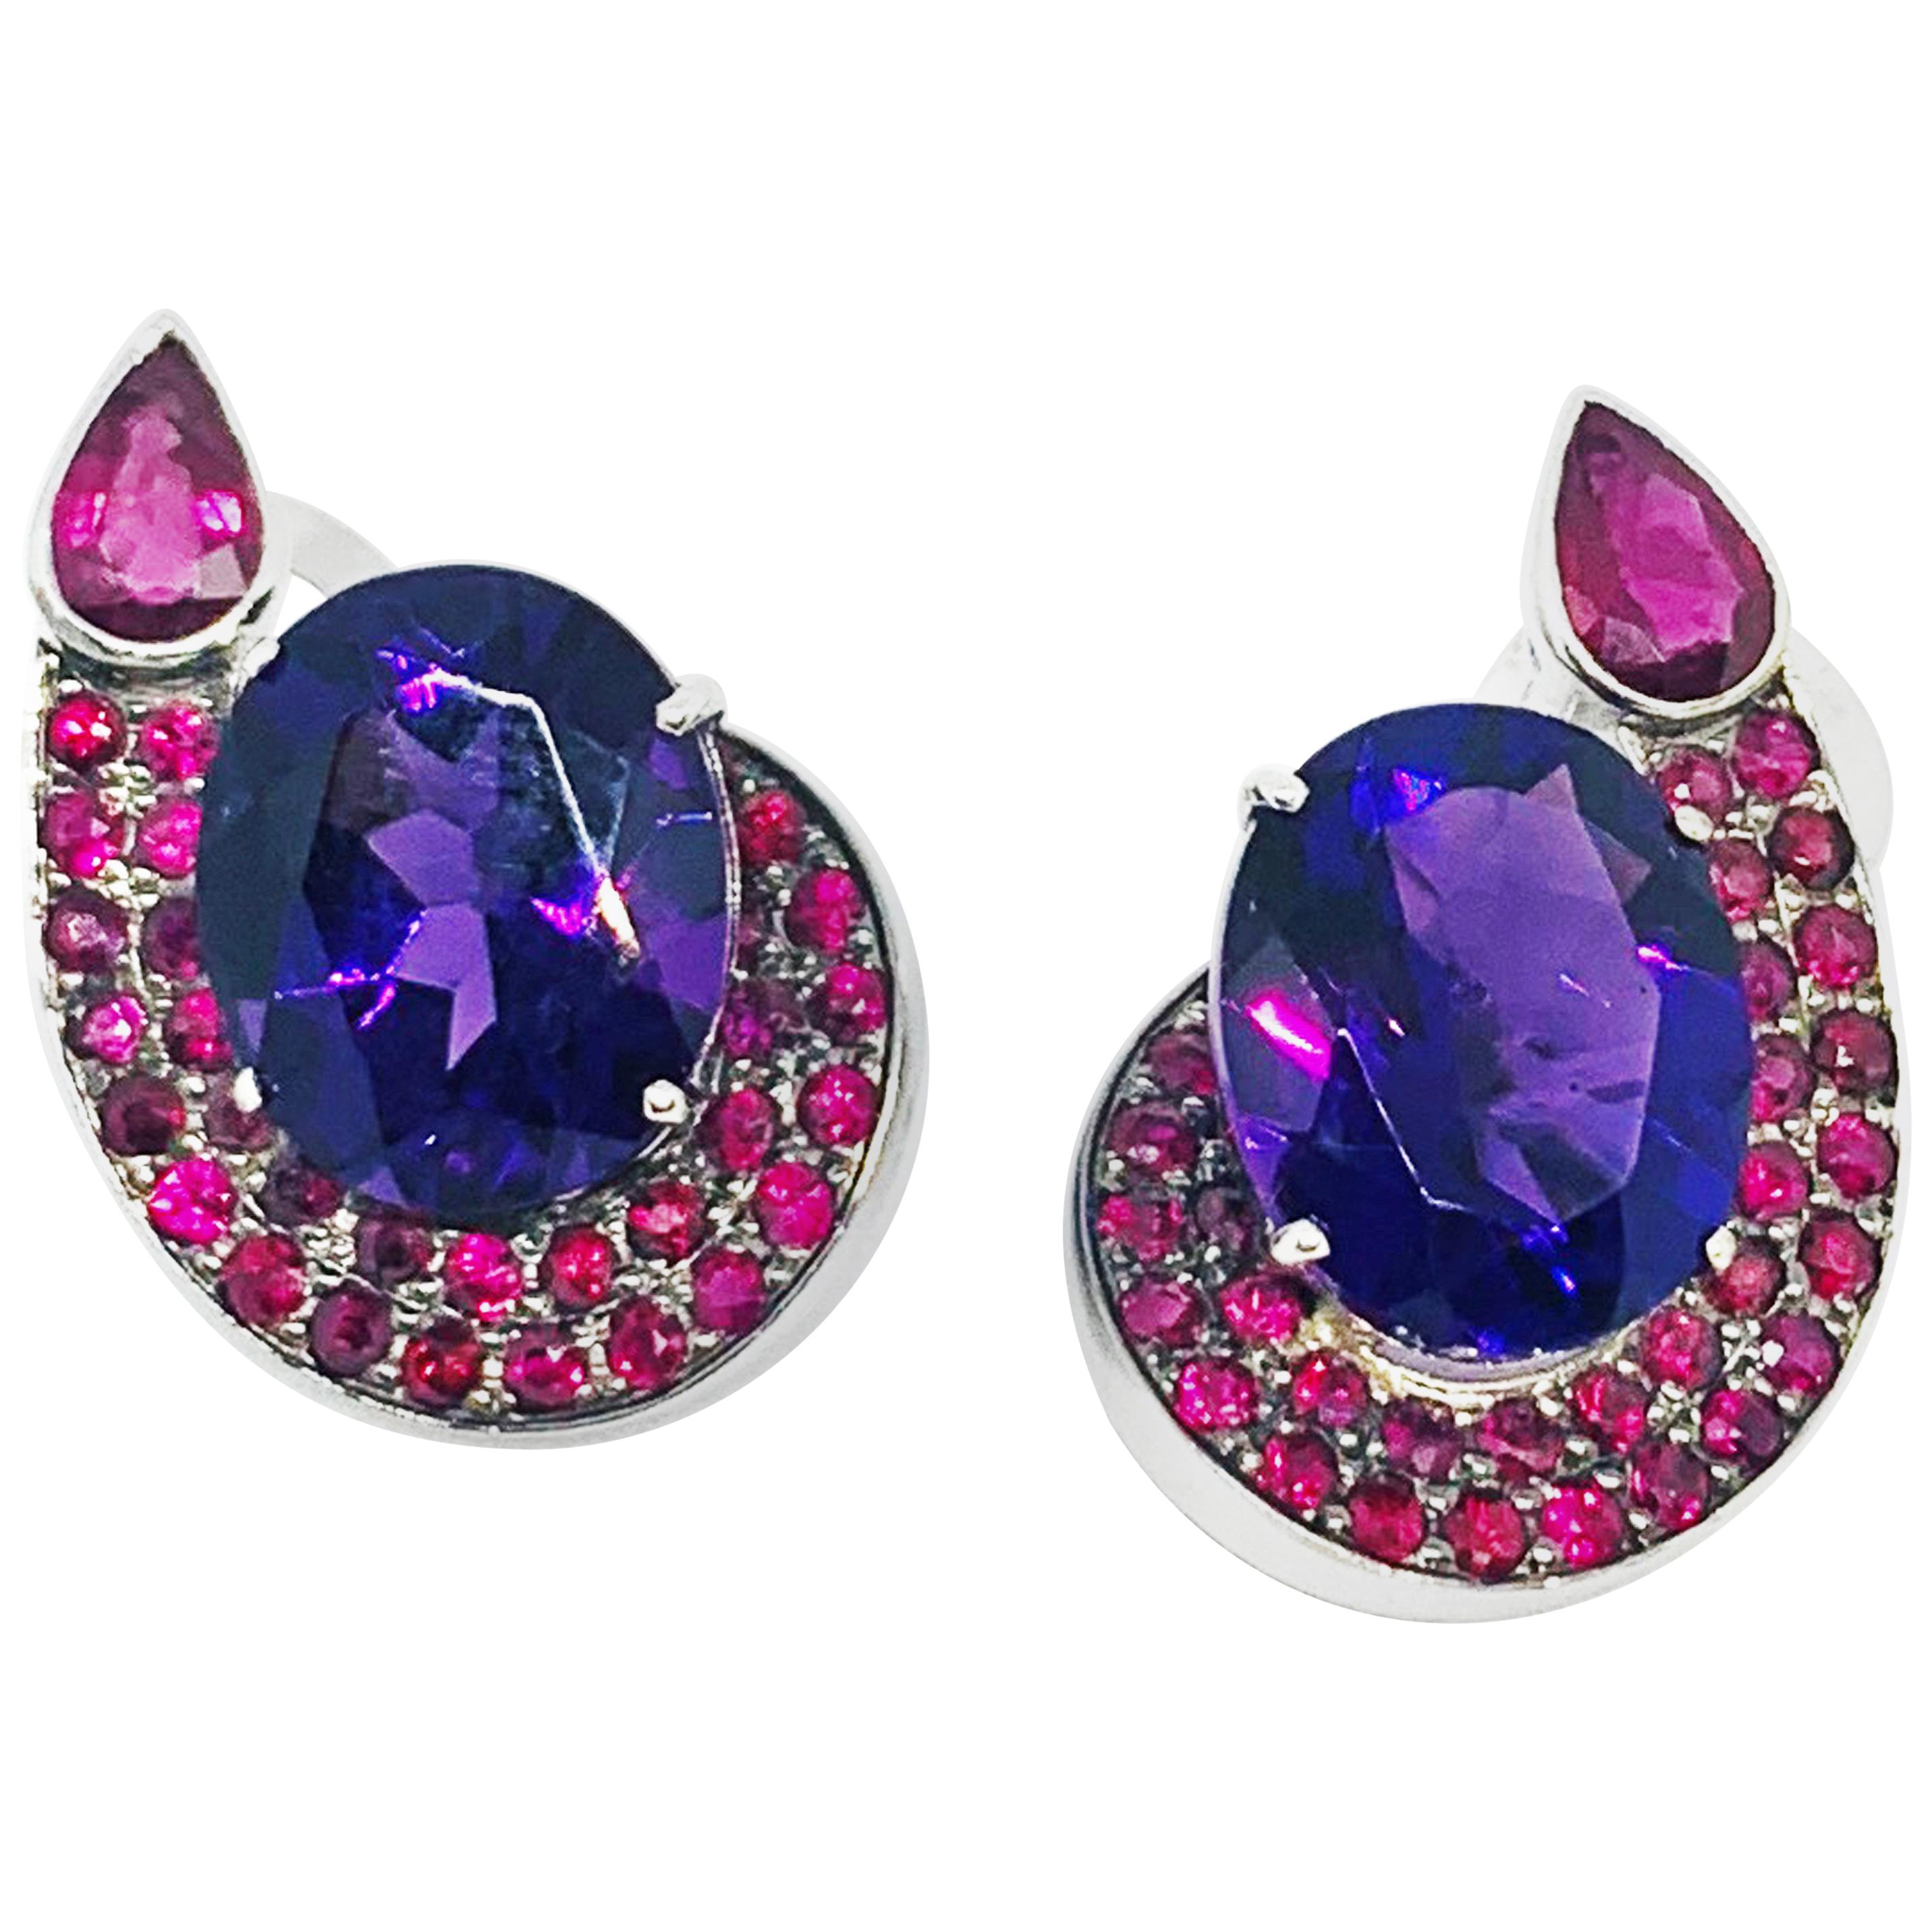 Contemporary Amethyst and Rubi Clip Earrings in 19.2 Karat White Gold